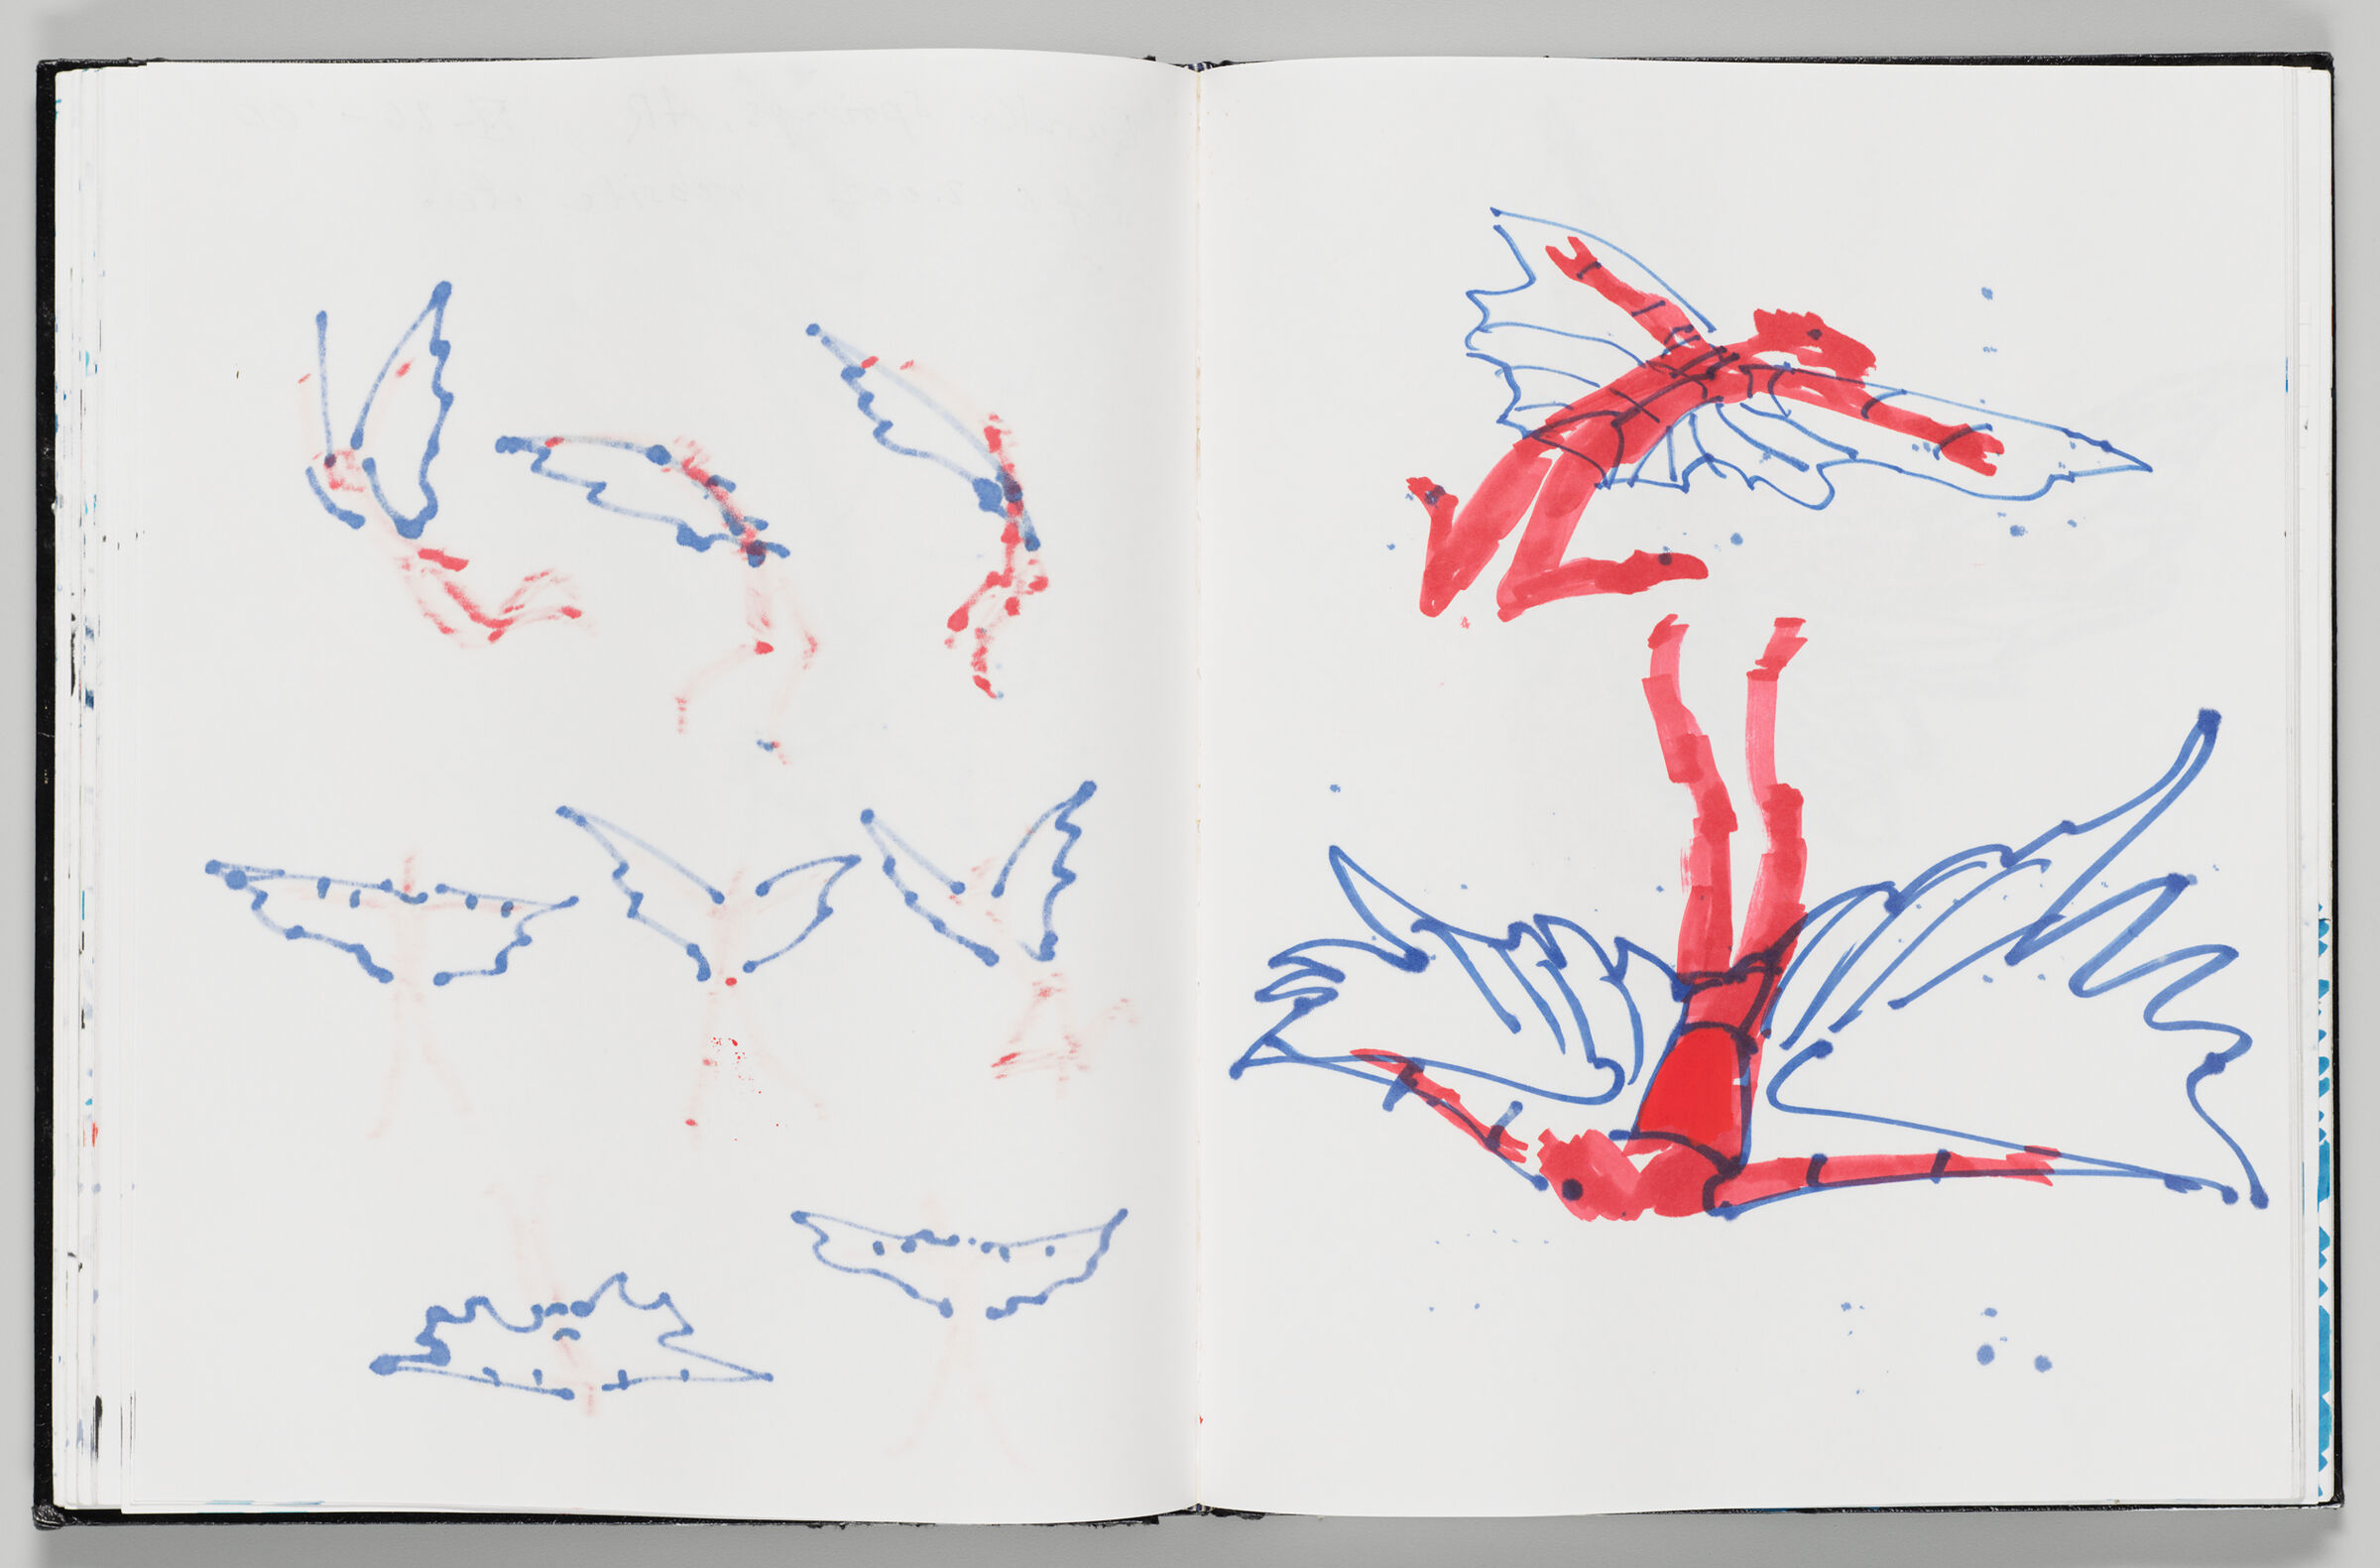 Untitled (Bleed-Through Of Previous Page With Color Transfer, Left Page); Untitled (Flying Figures With Color Transfer, Right Page)